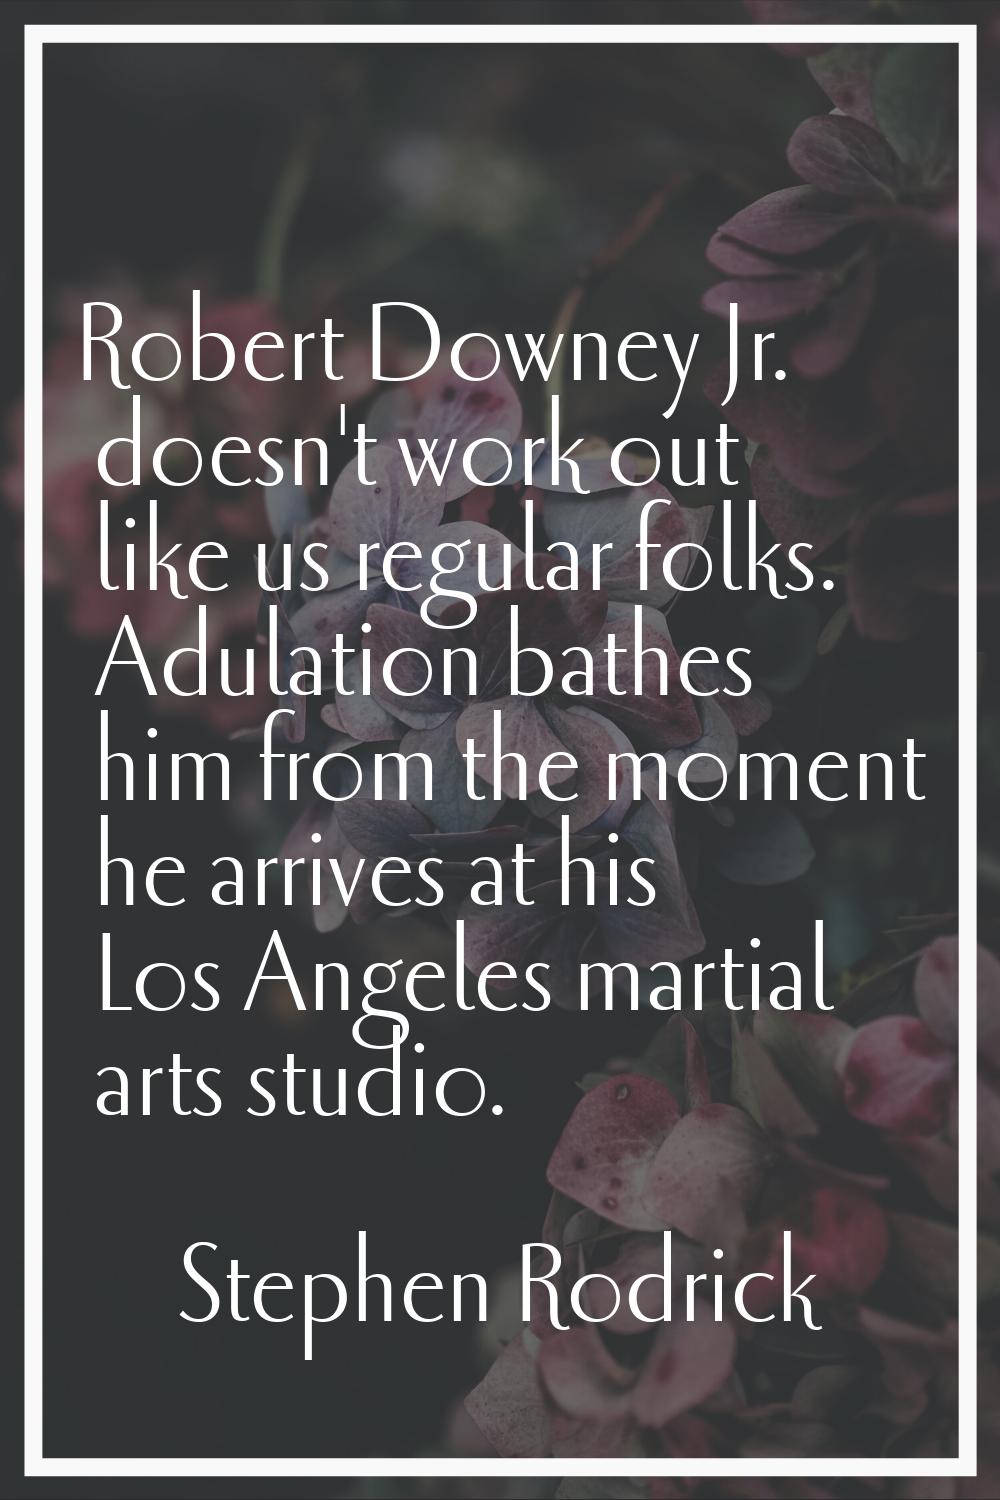 Robert Downey Jr. doesn't work out like us regular folks. Adulation bathes him from the moment he a